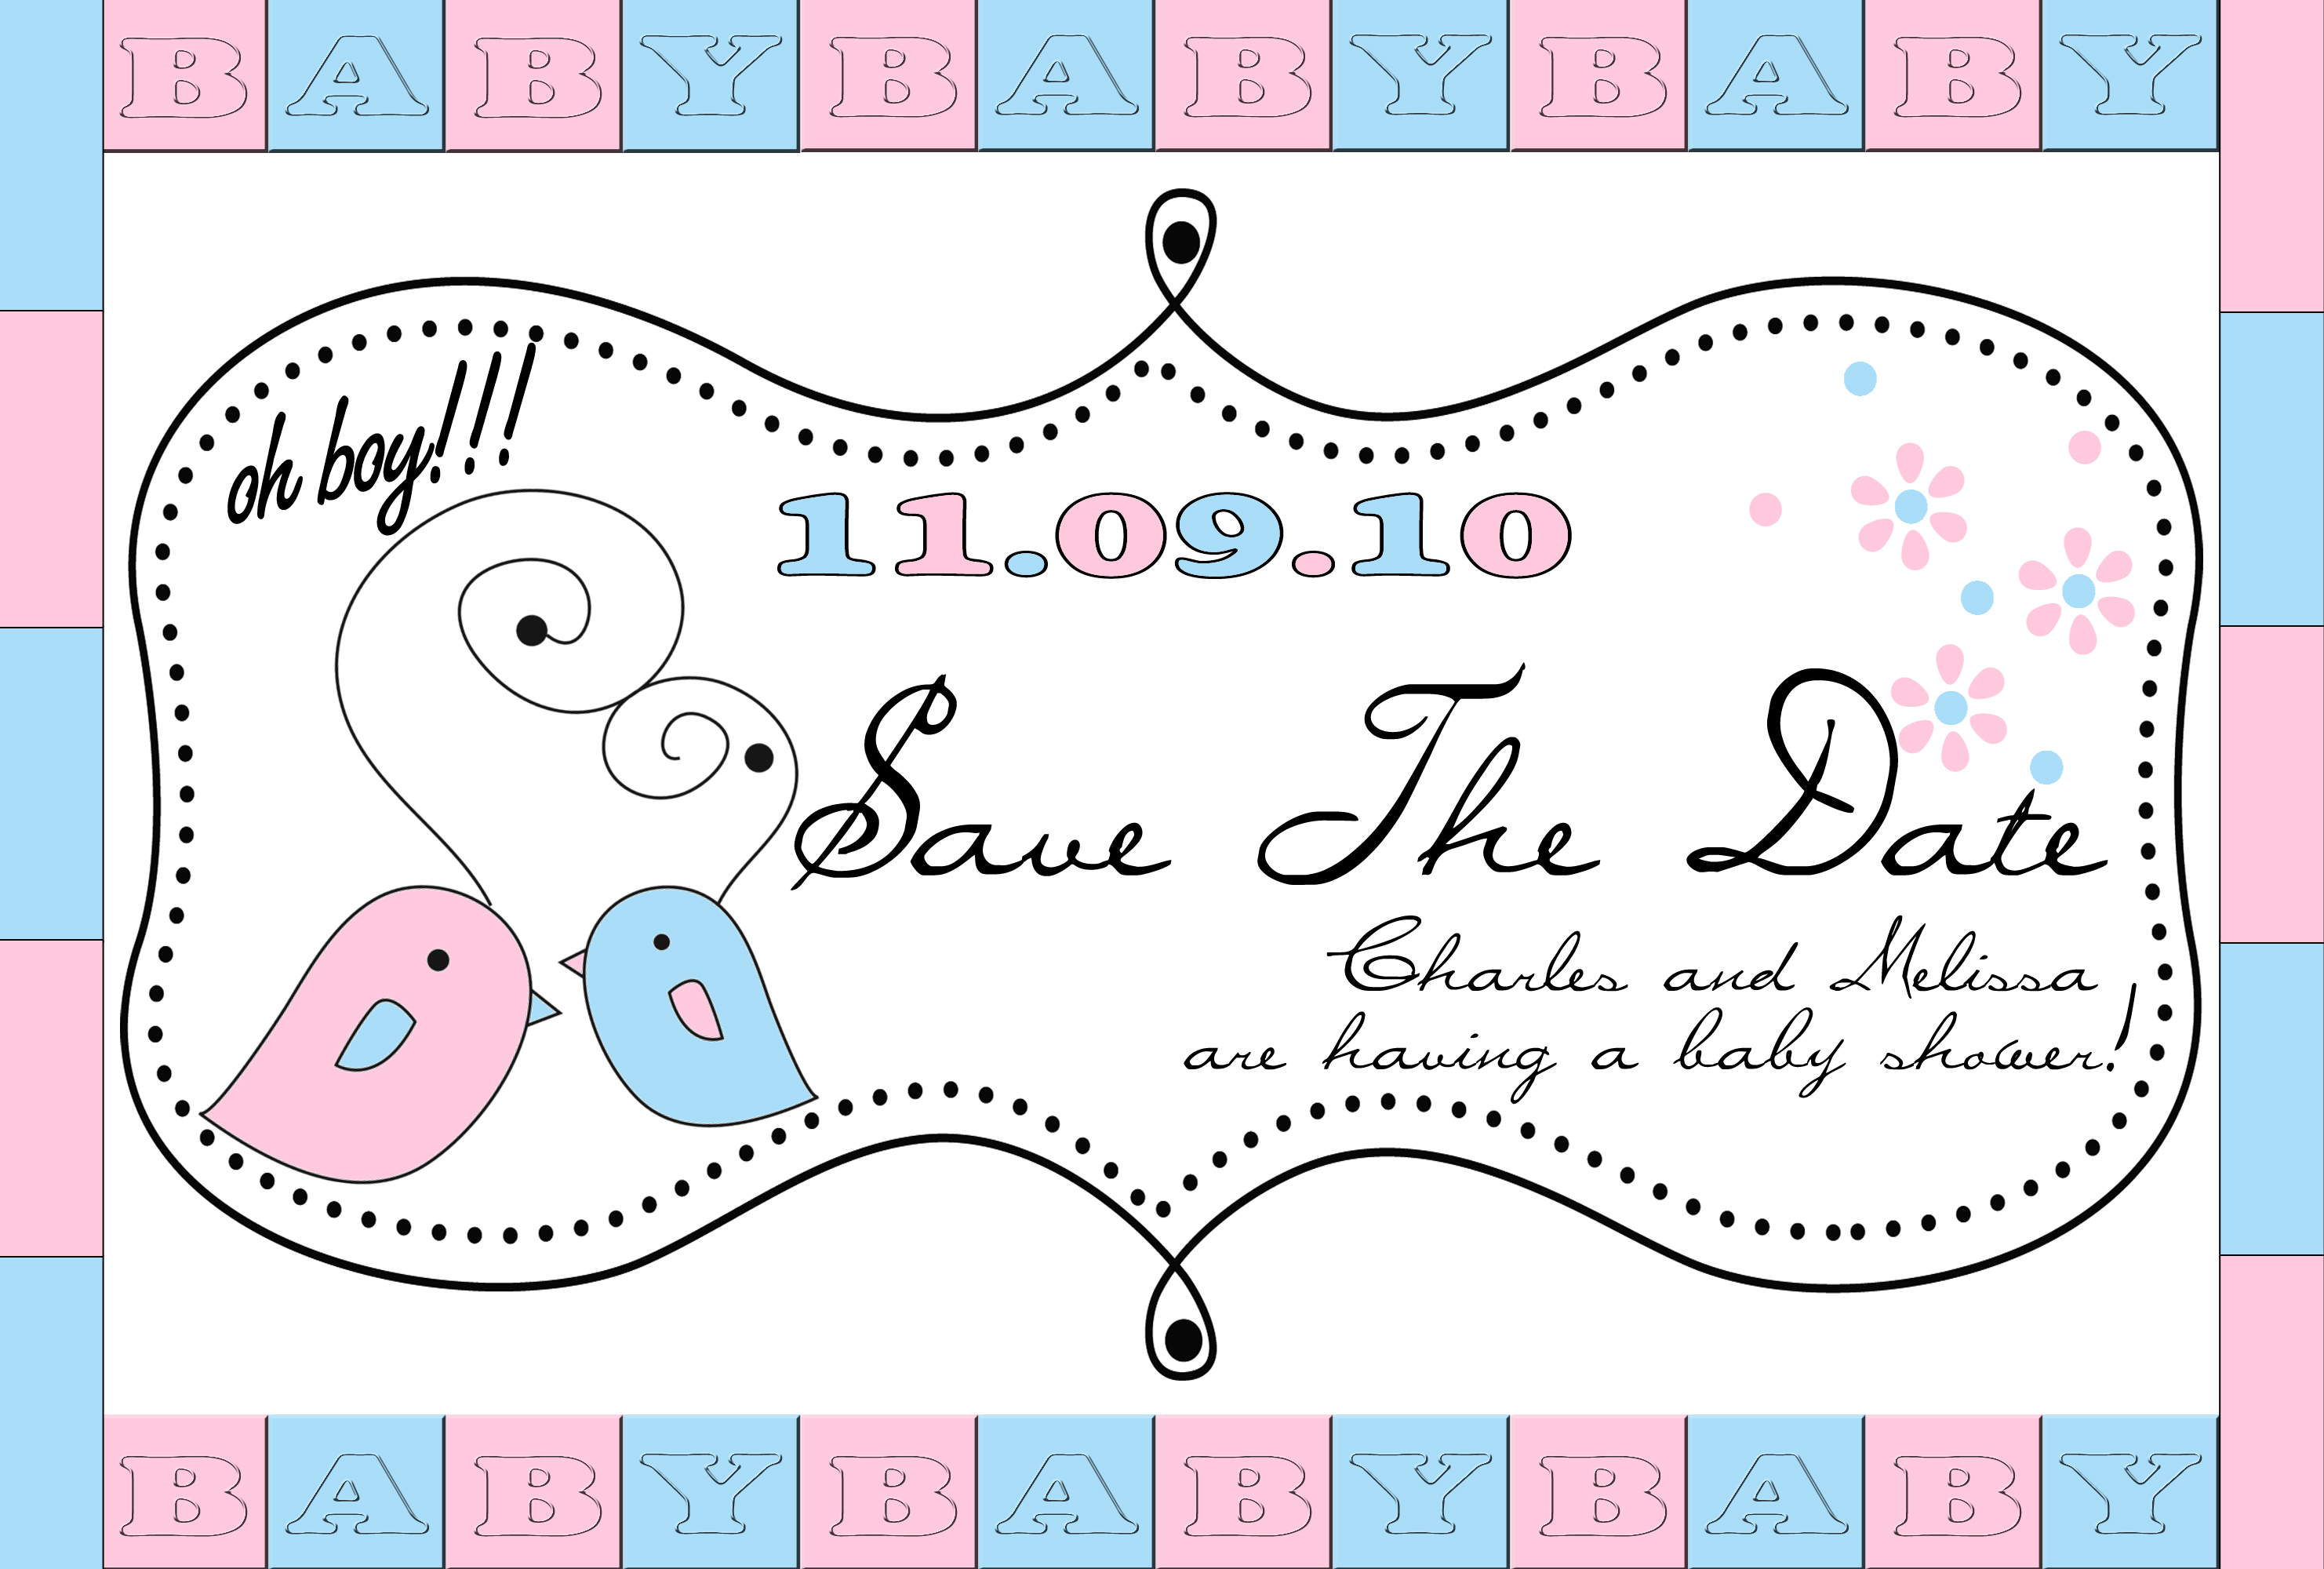 Save the Date for Melissa Charles Baby Shower